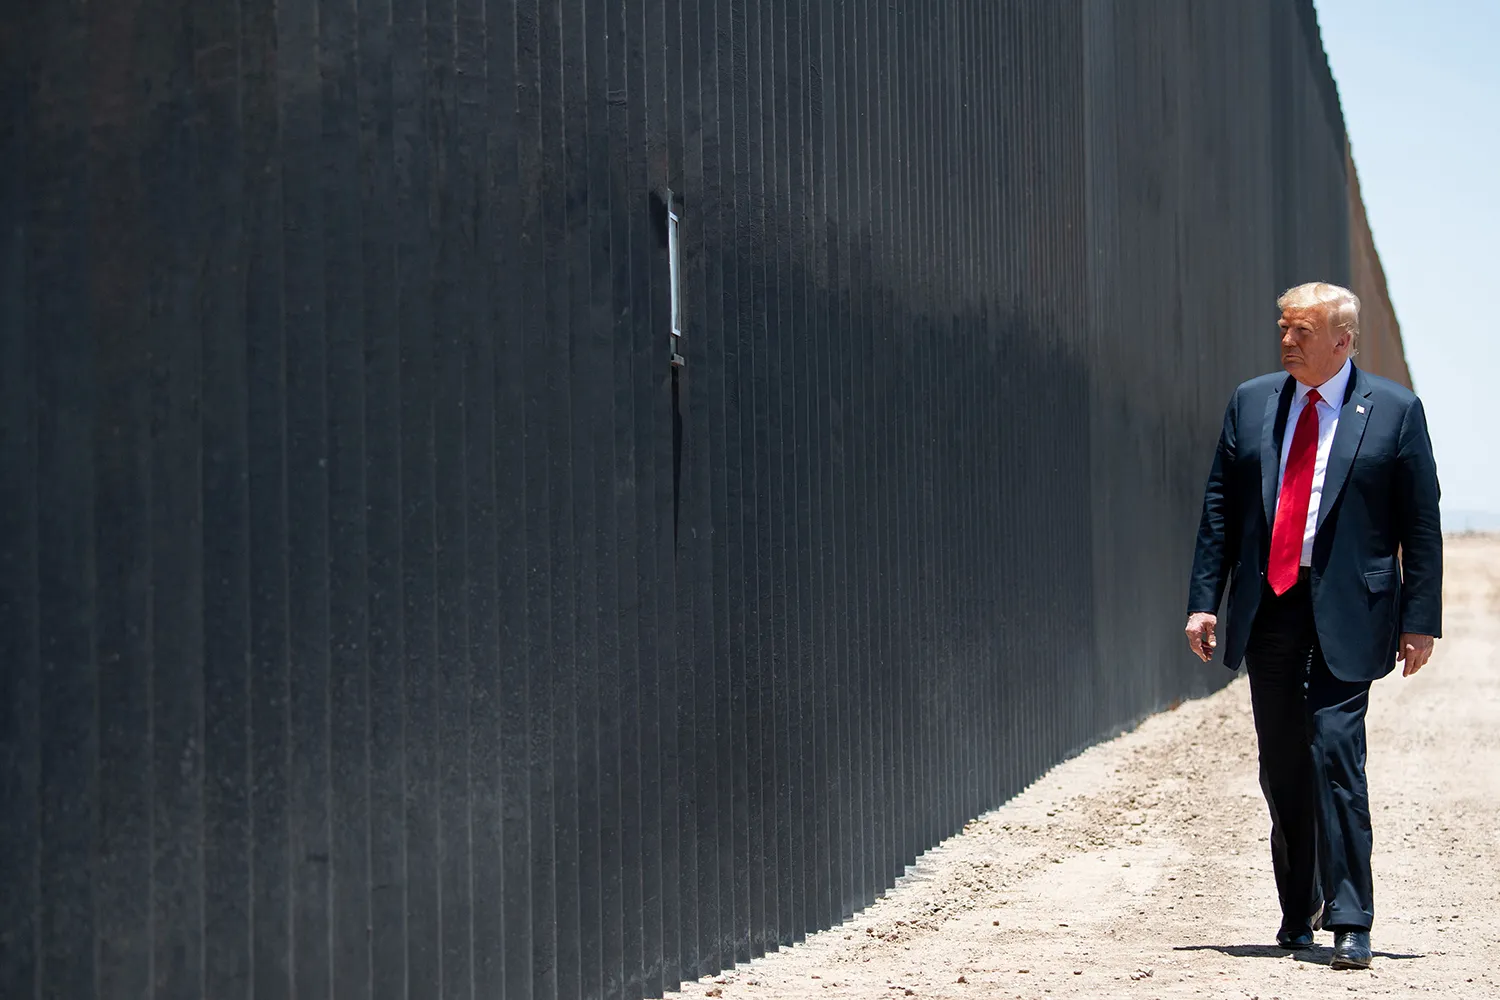 Then-President Donald Trump walks on the dusty ground alongside a long stretch of the U.S.-Mexico border wall, which is black and corrugated and more than twice his height. Trump wears a dark suit and a bright red tie.